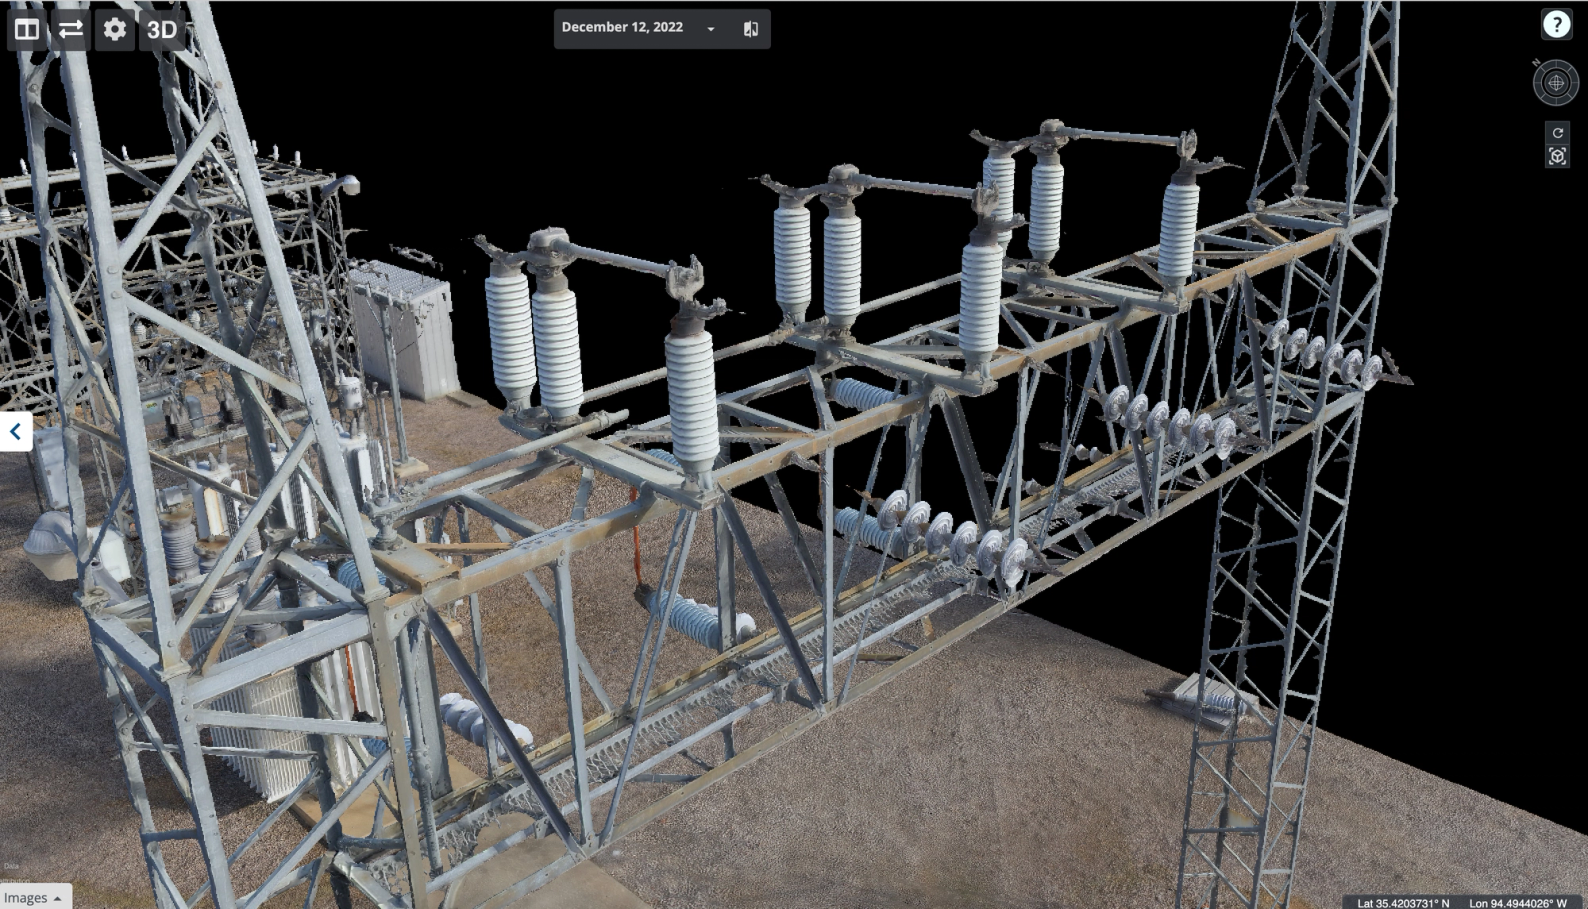 3D model of a Arkansas Valley Electric (AVECC) utilities substation captured by a Skydio drone